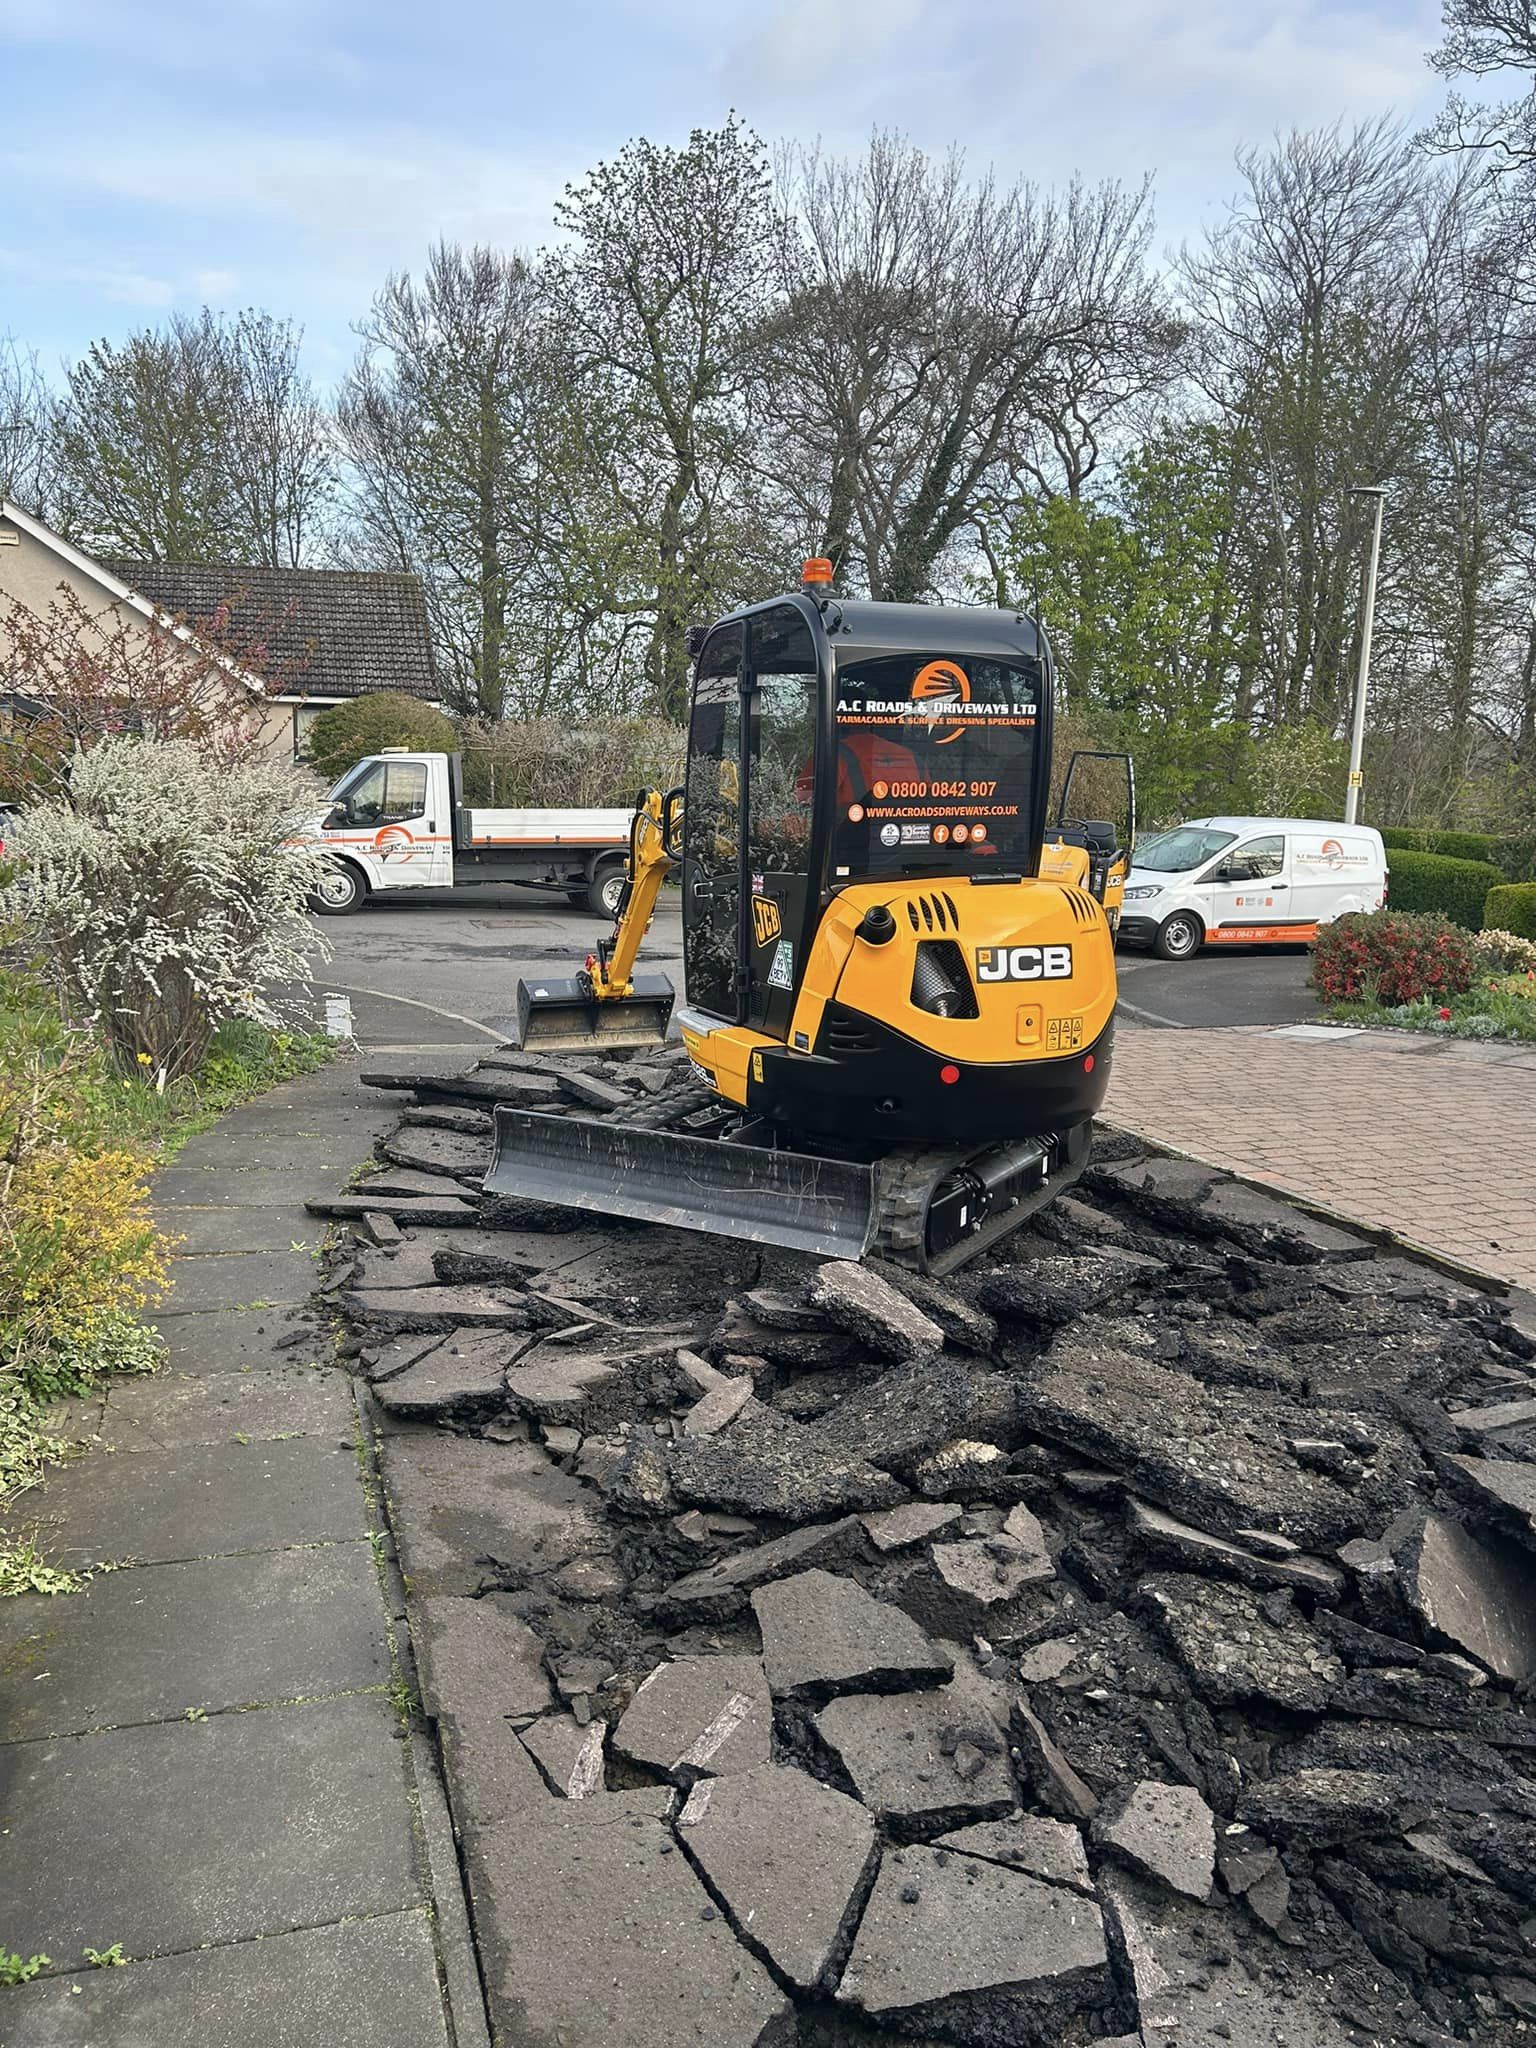 Replace Old Tarmac Driveway - remove old tarmac & excavate